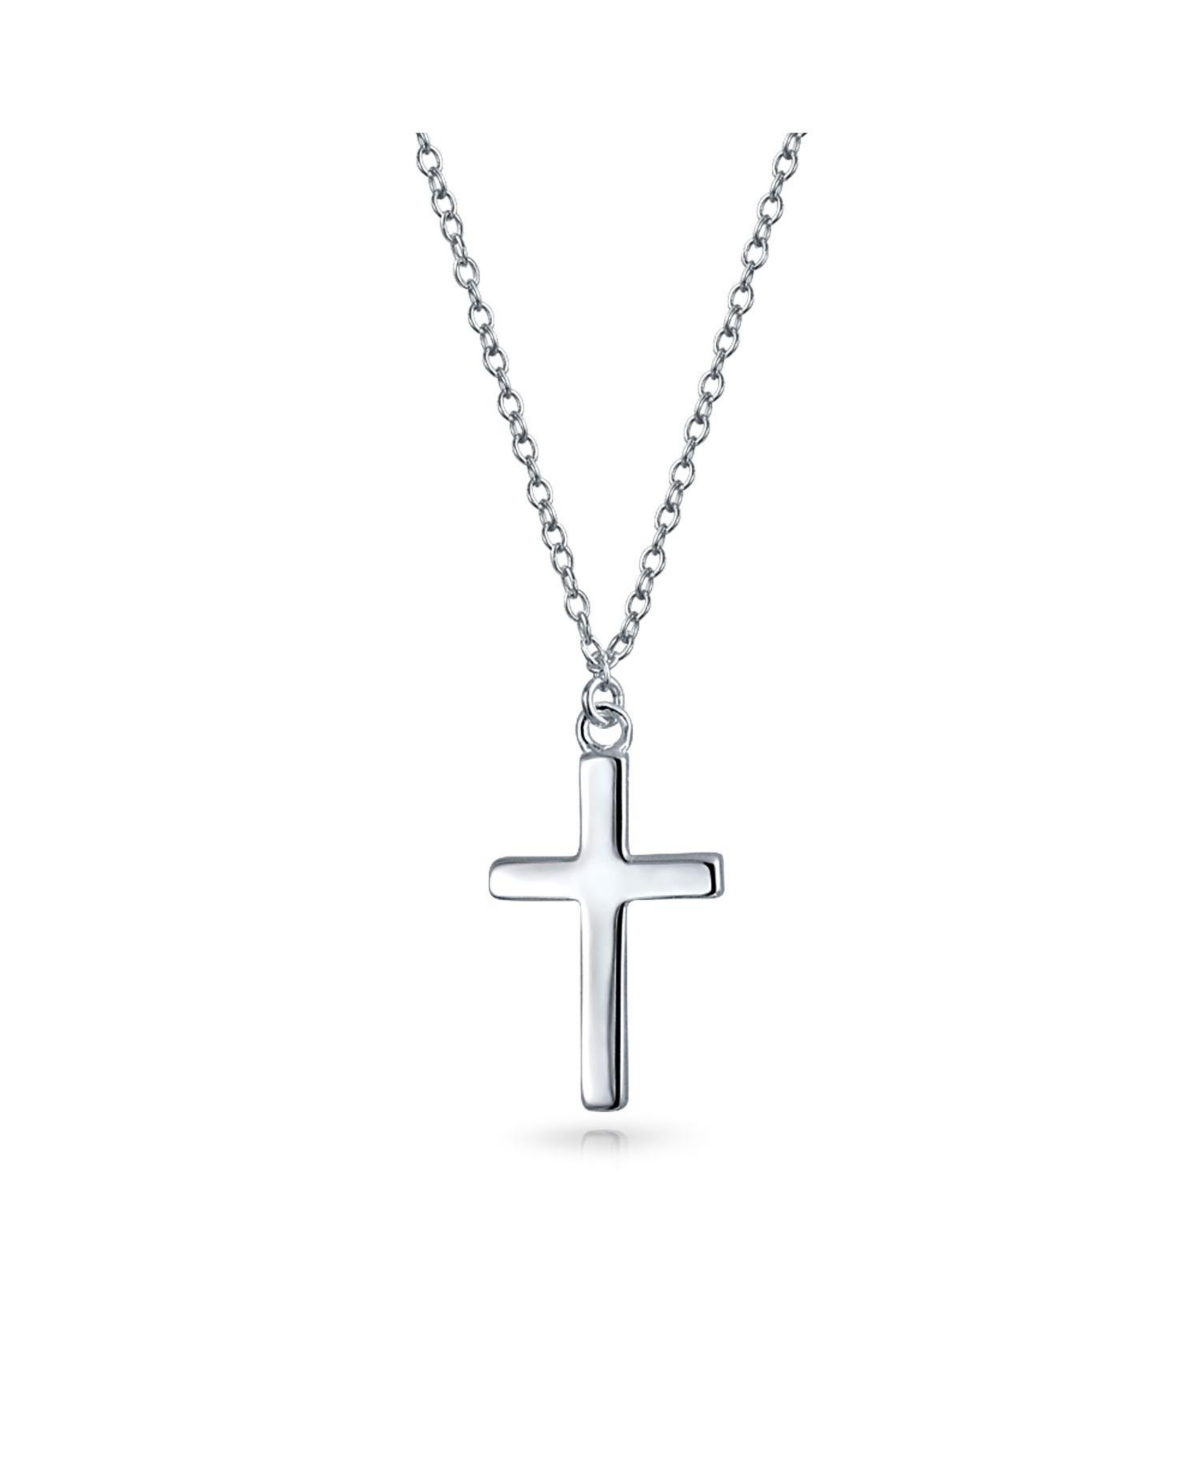 Delicate Small Latin Cross Pendant Religious Necklace For Women Flat Polished .925 Sterling Silver .40 Inch - Silver b